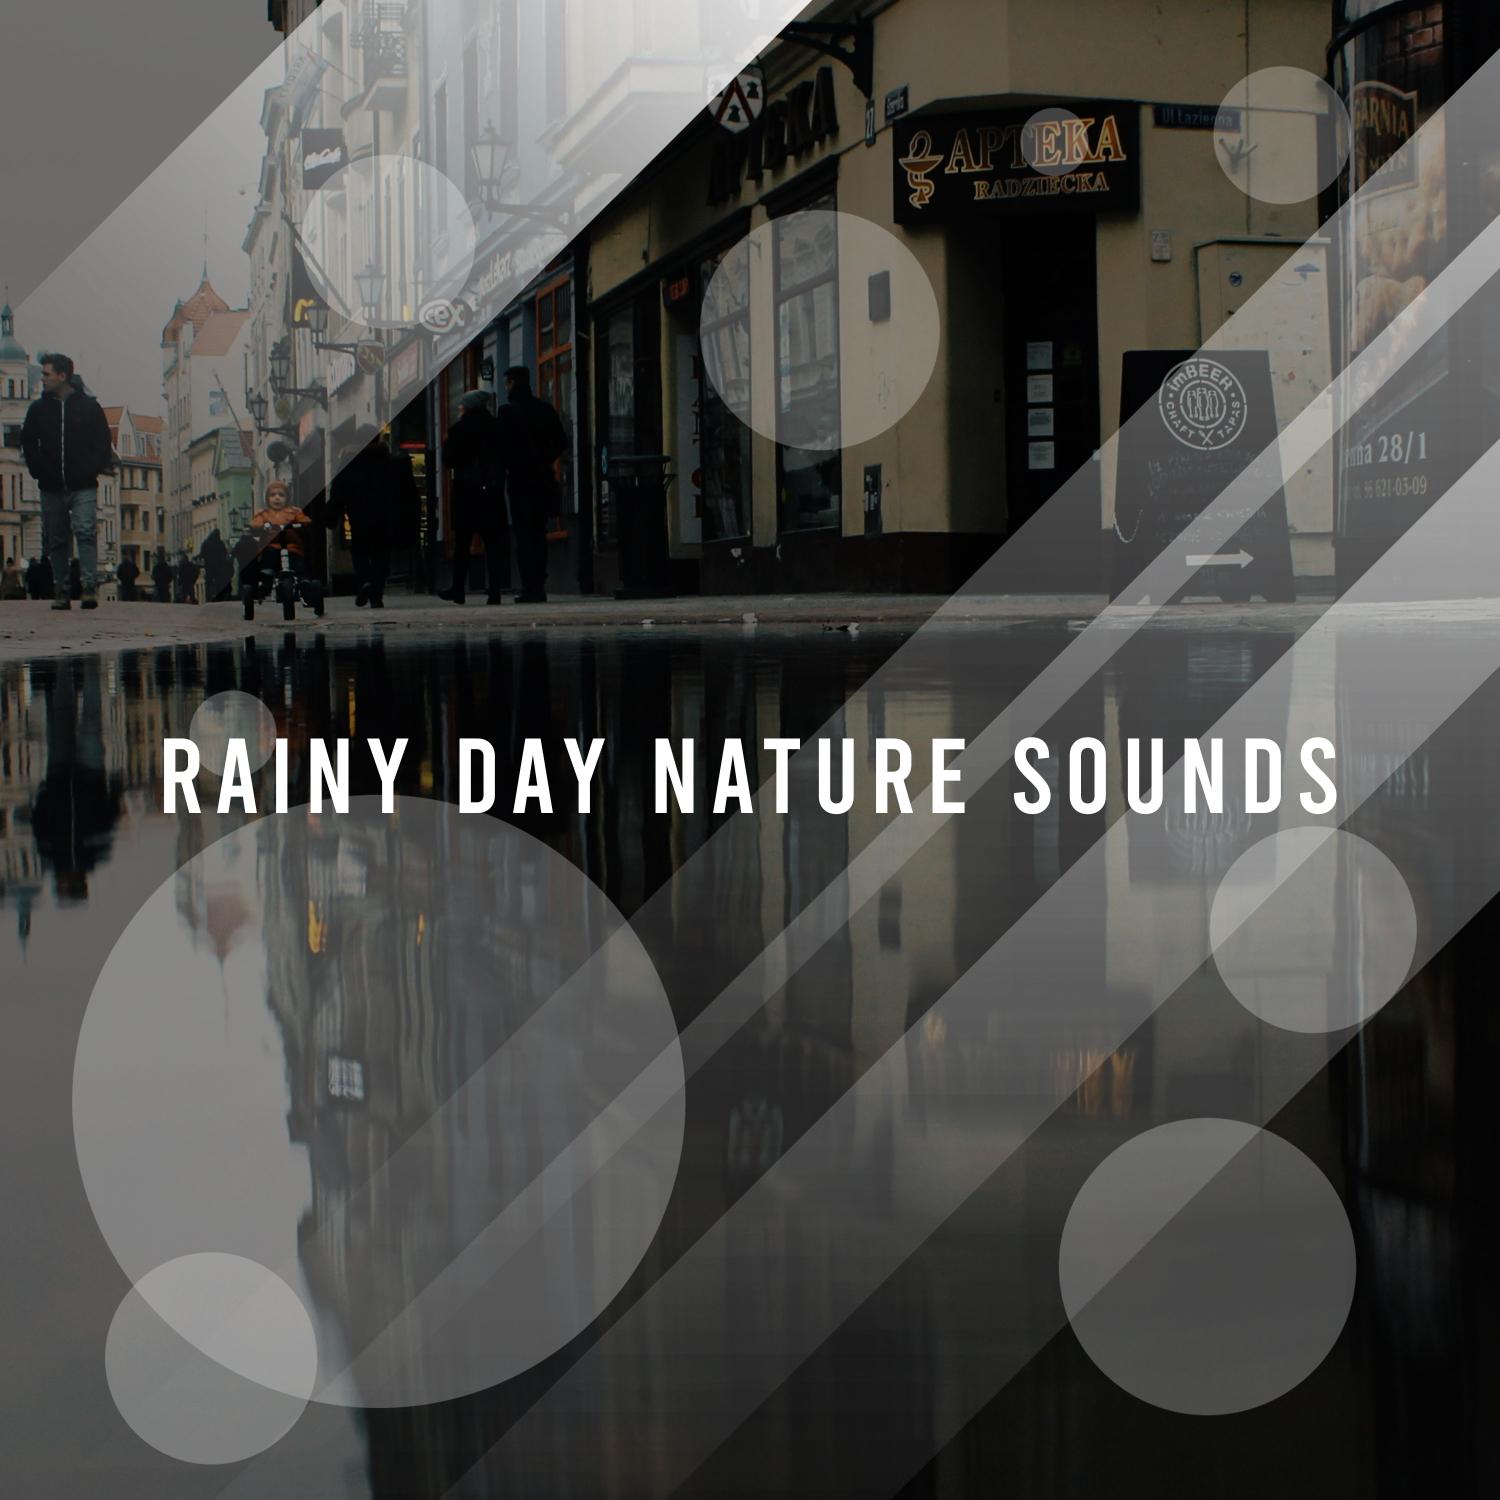 16 Rainy Day Nature Sounds - Calm Down with Rain Sounds